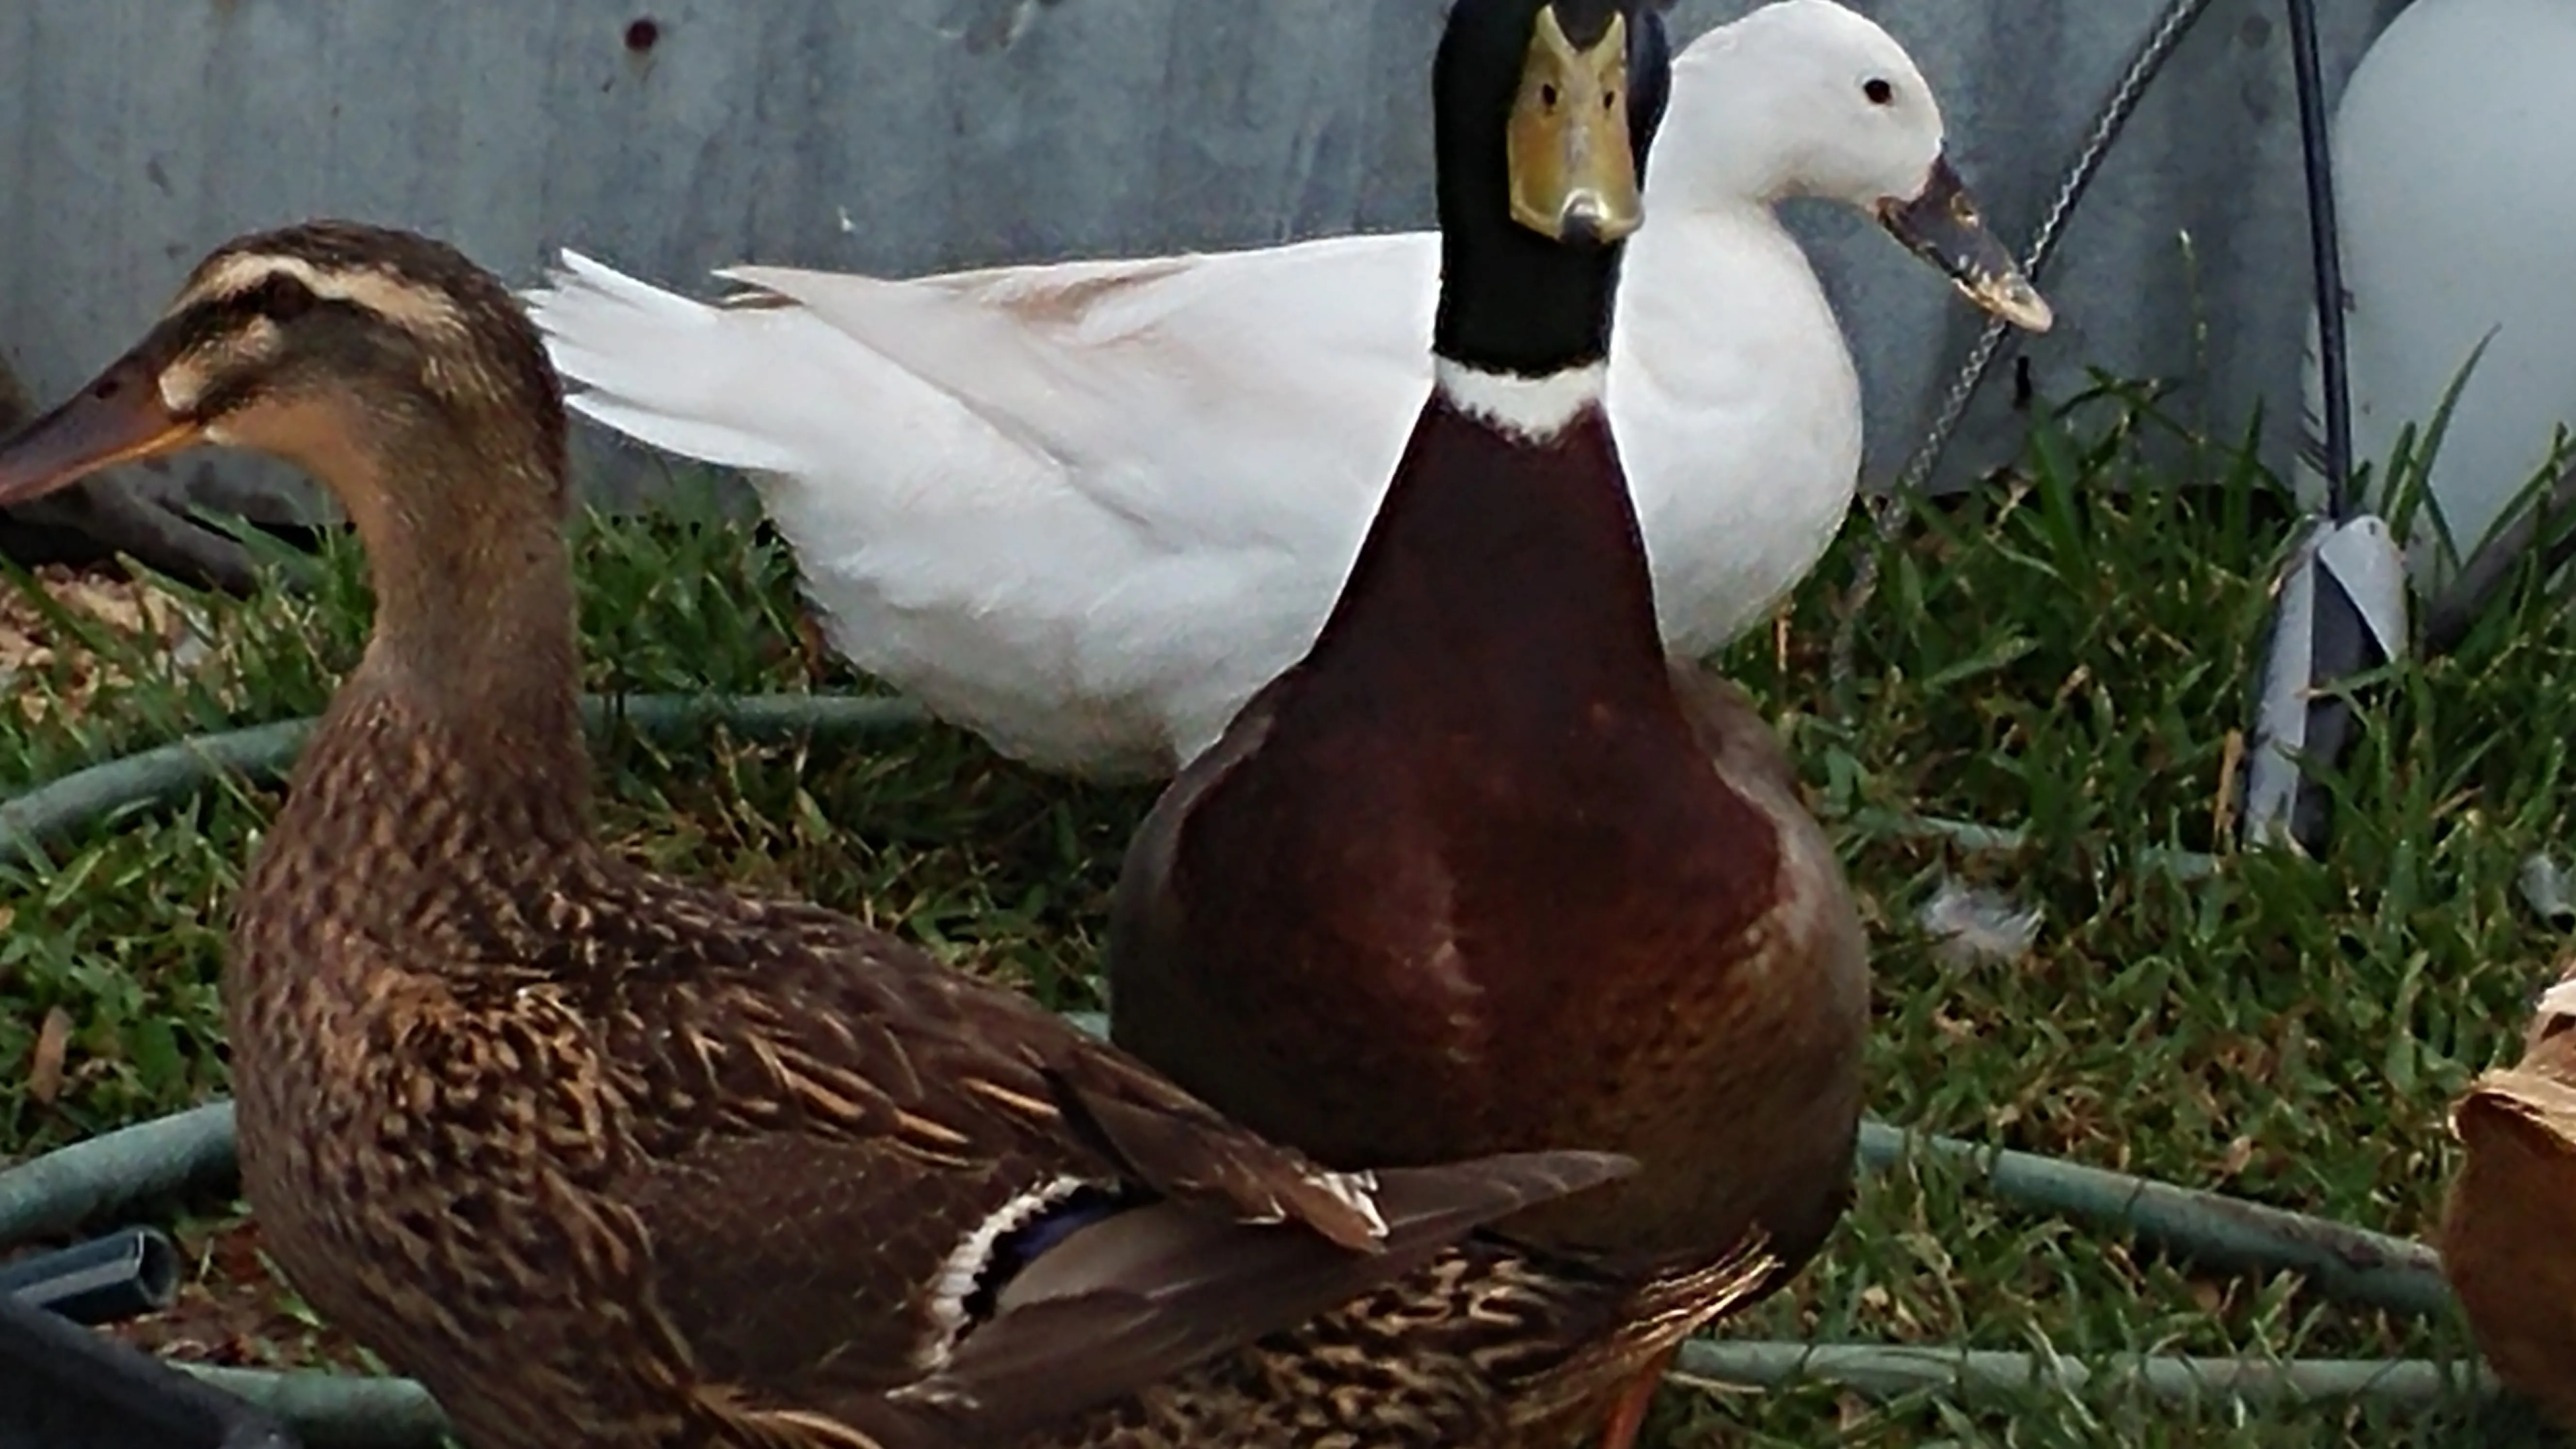 Thinking about raising ducks? Here's a few things to consider